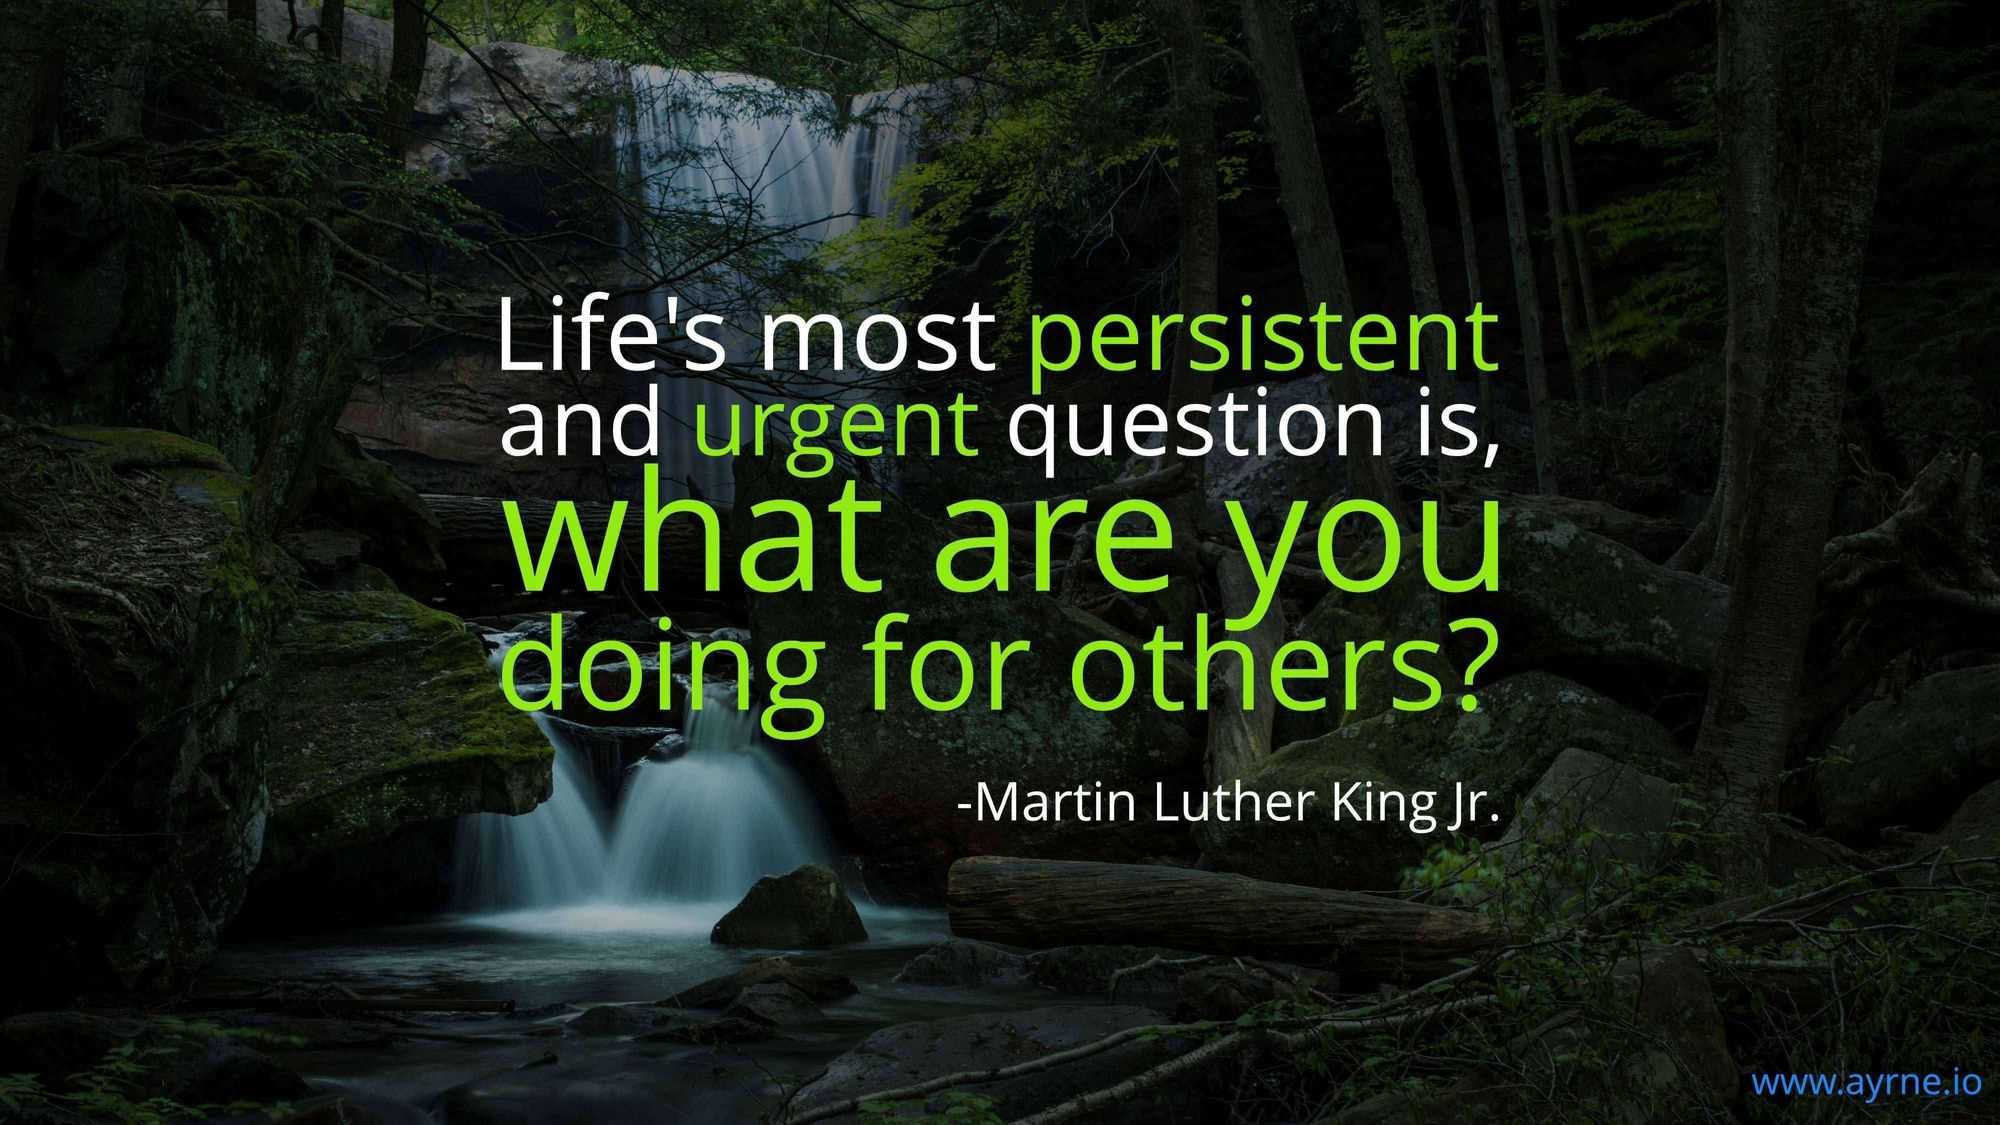 Life's most persistent and urgent question is, 'What are you doing for others?